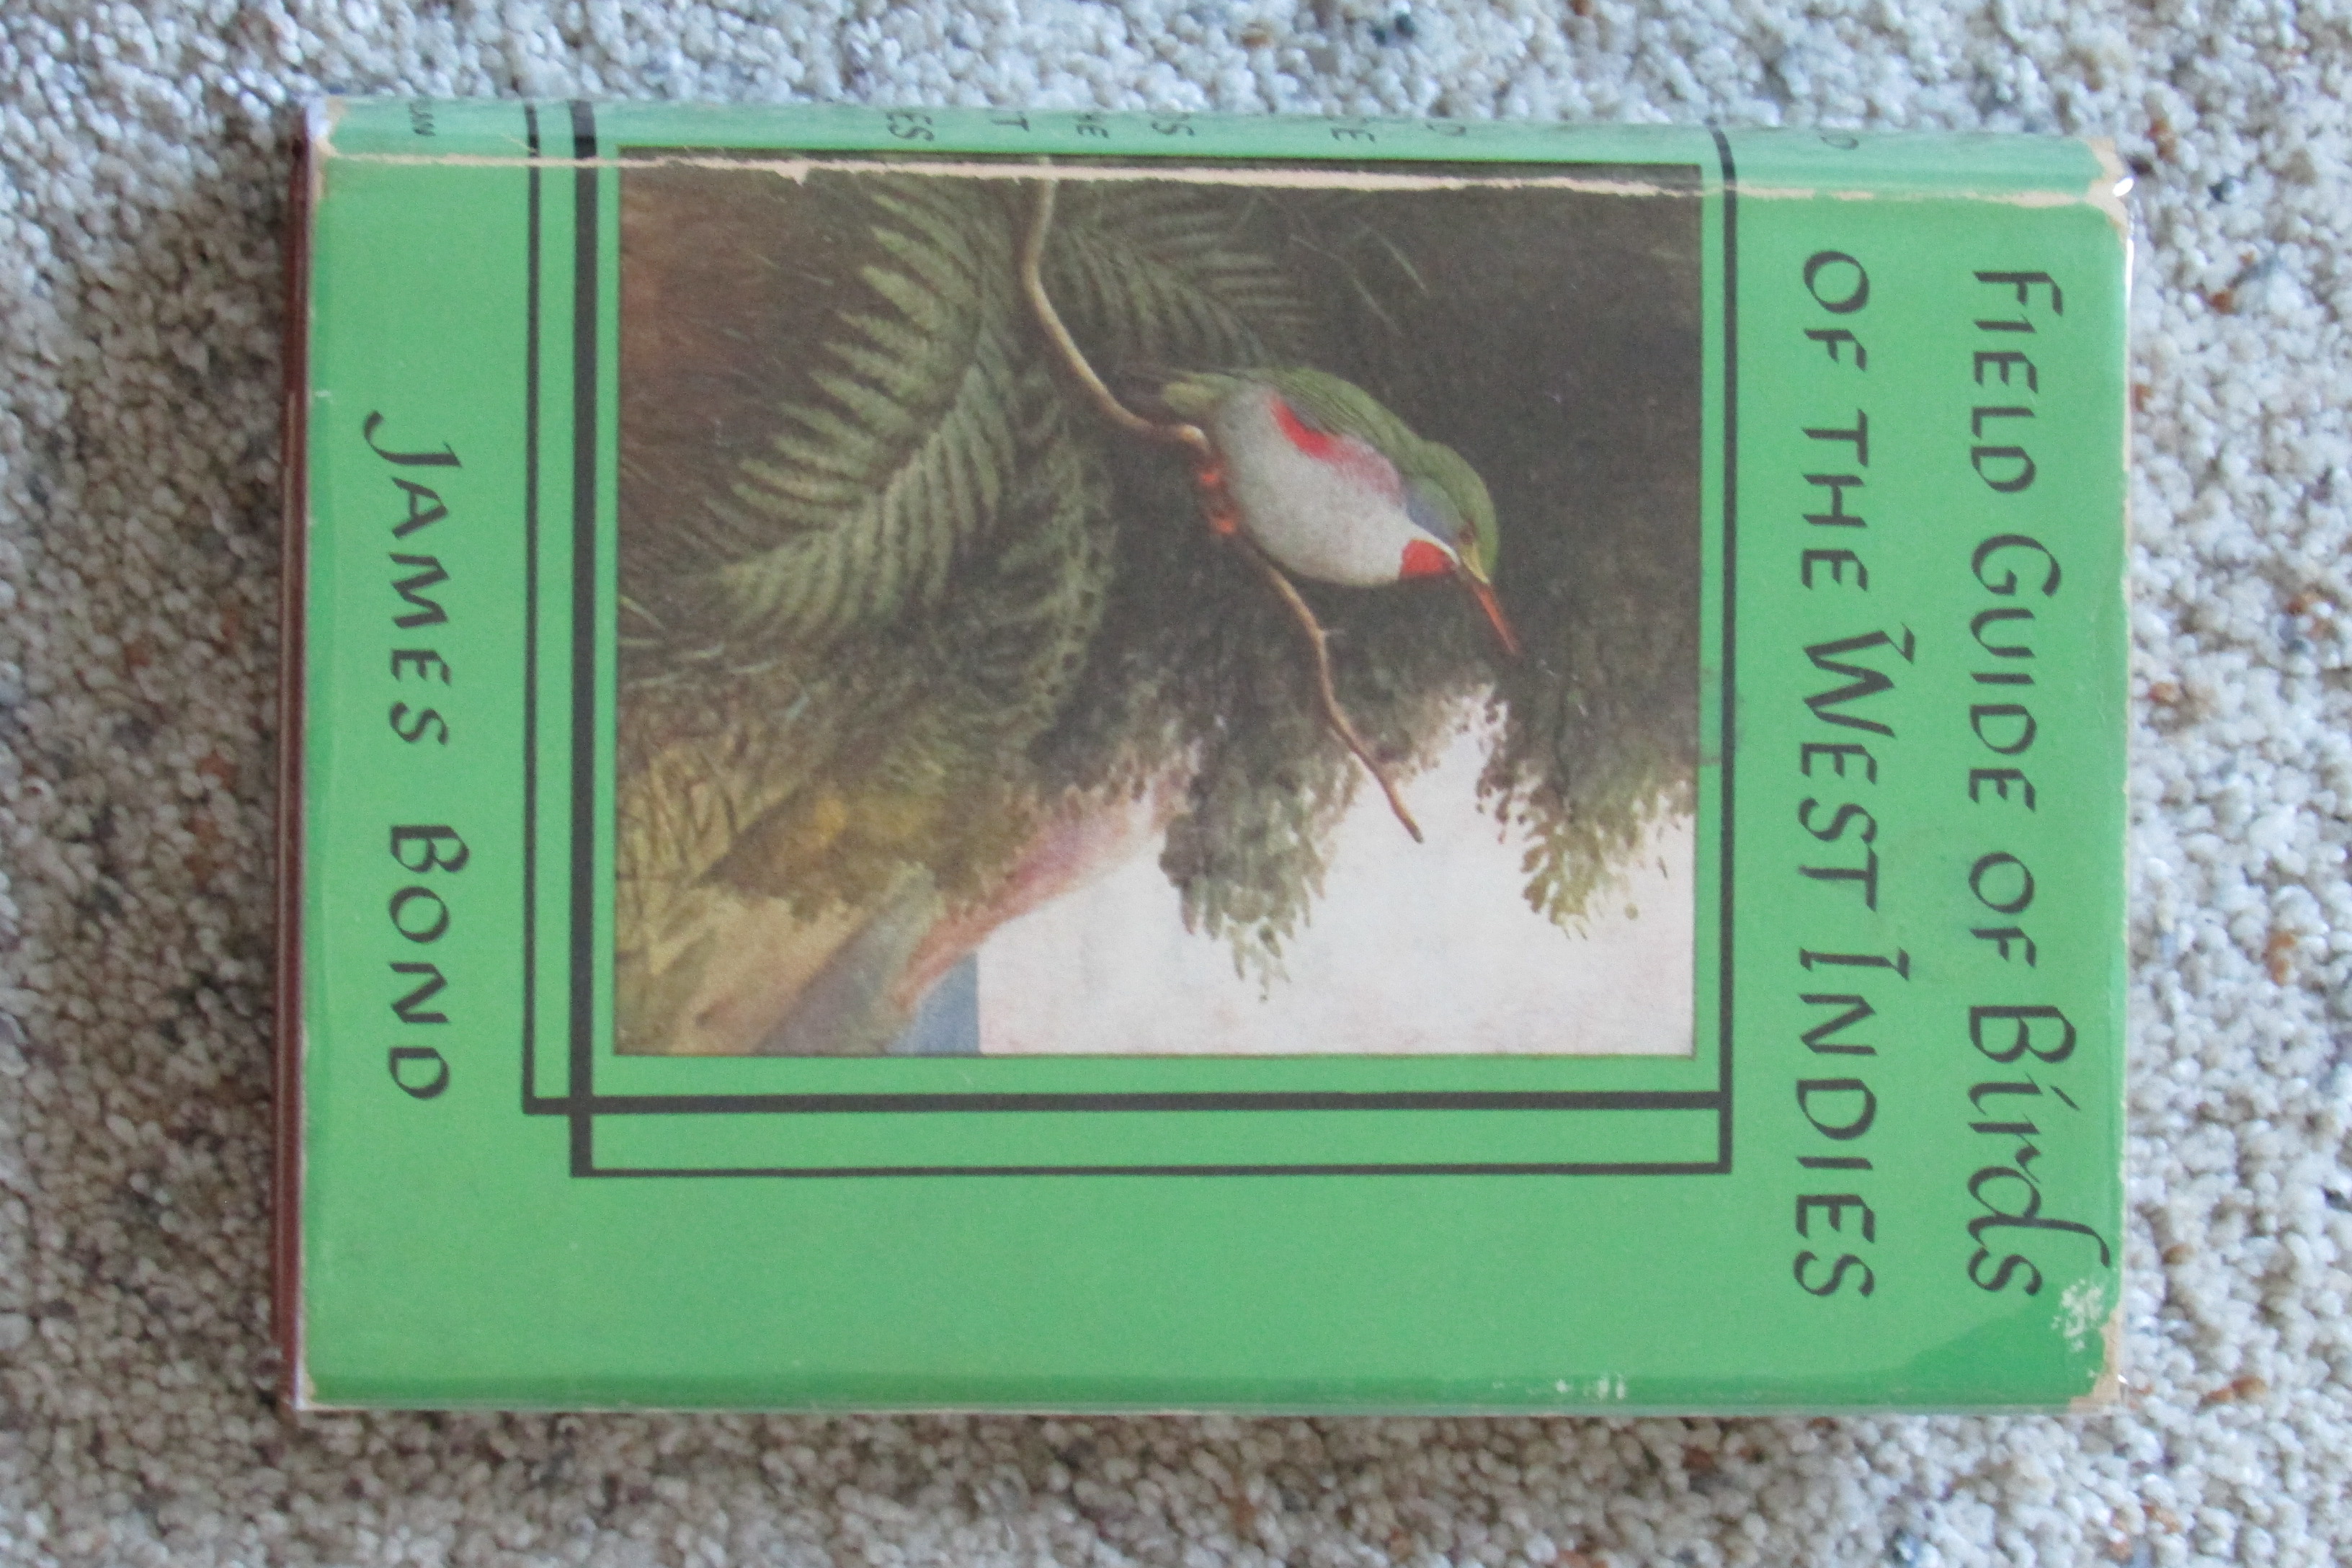 Field guide to birds of the west indies james bond James Bond Birds West Indies First Edition Abebooks